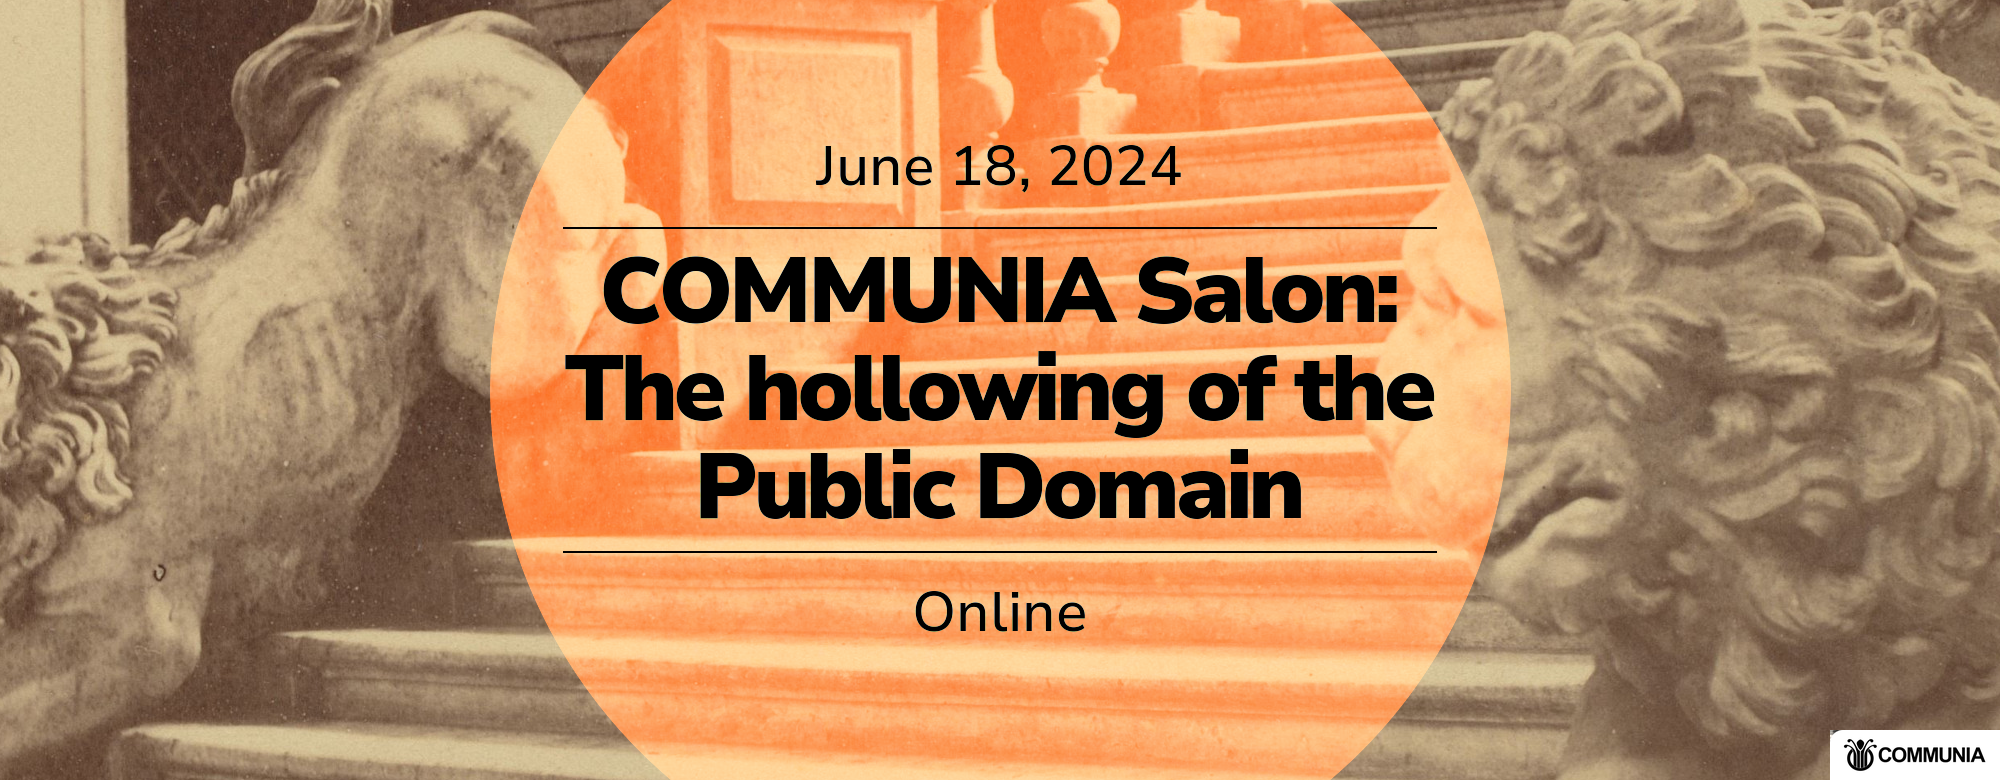 A photography of two statues of lions announcing the COMMUNIA Salon on the hollowing of the Public Domain.